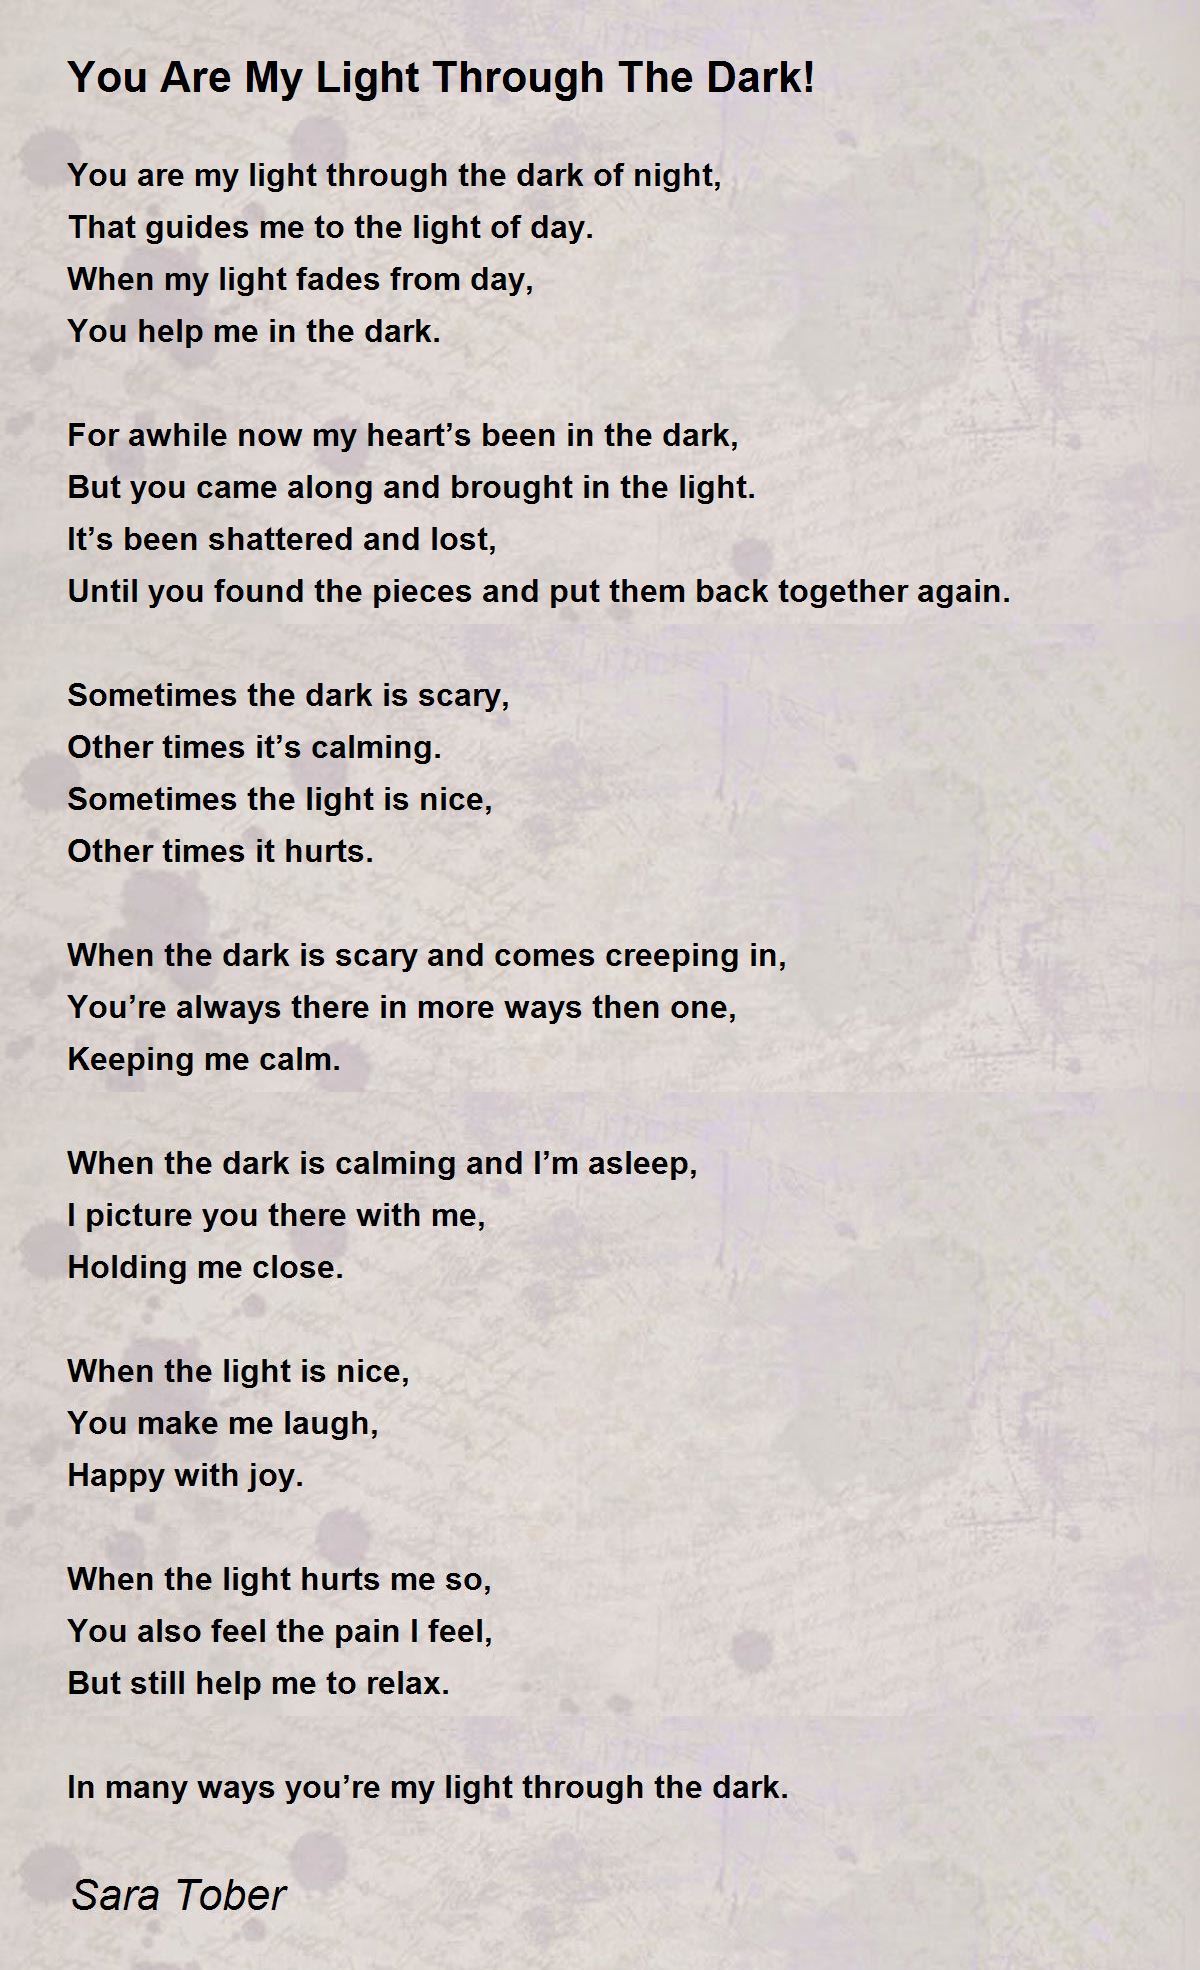 You Are Light Through - You Are My Light Through The Dark! Poem by Sara Tober